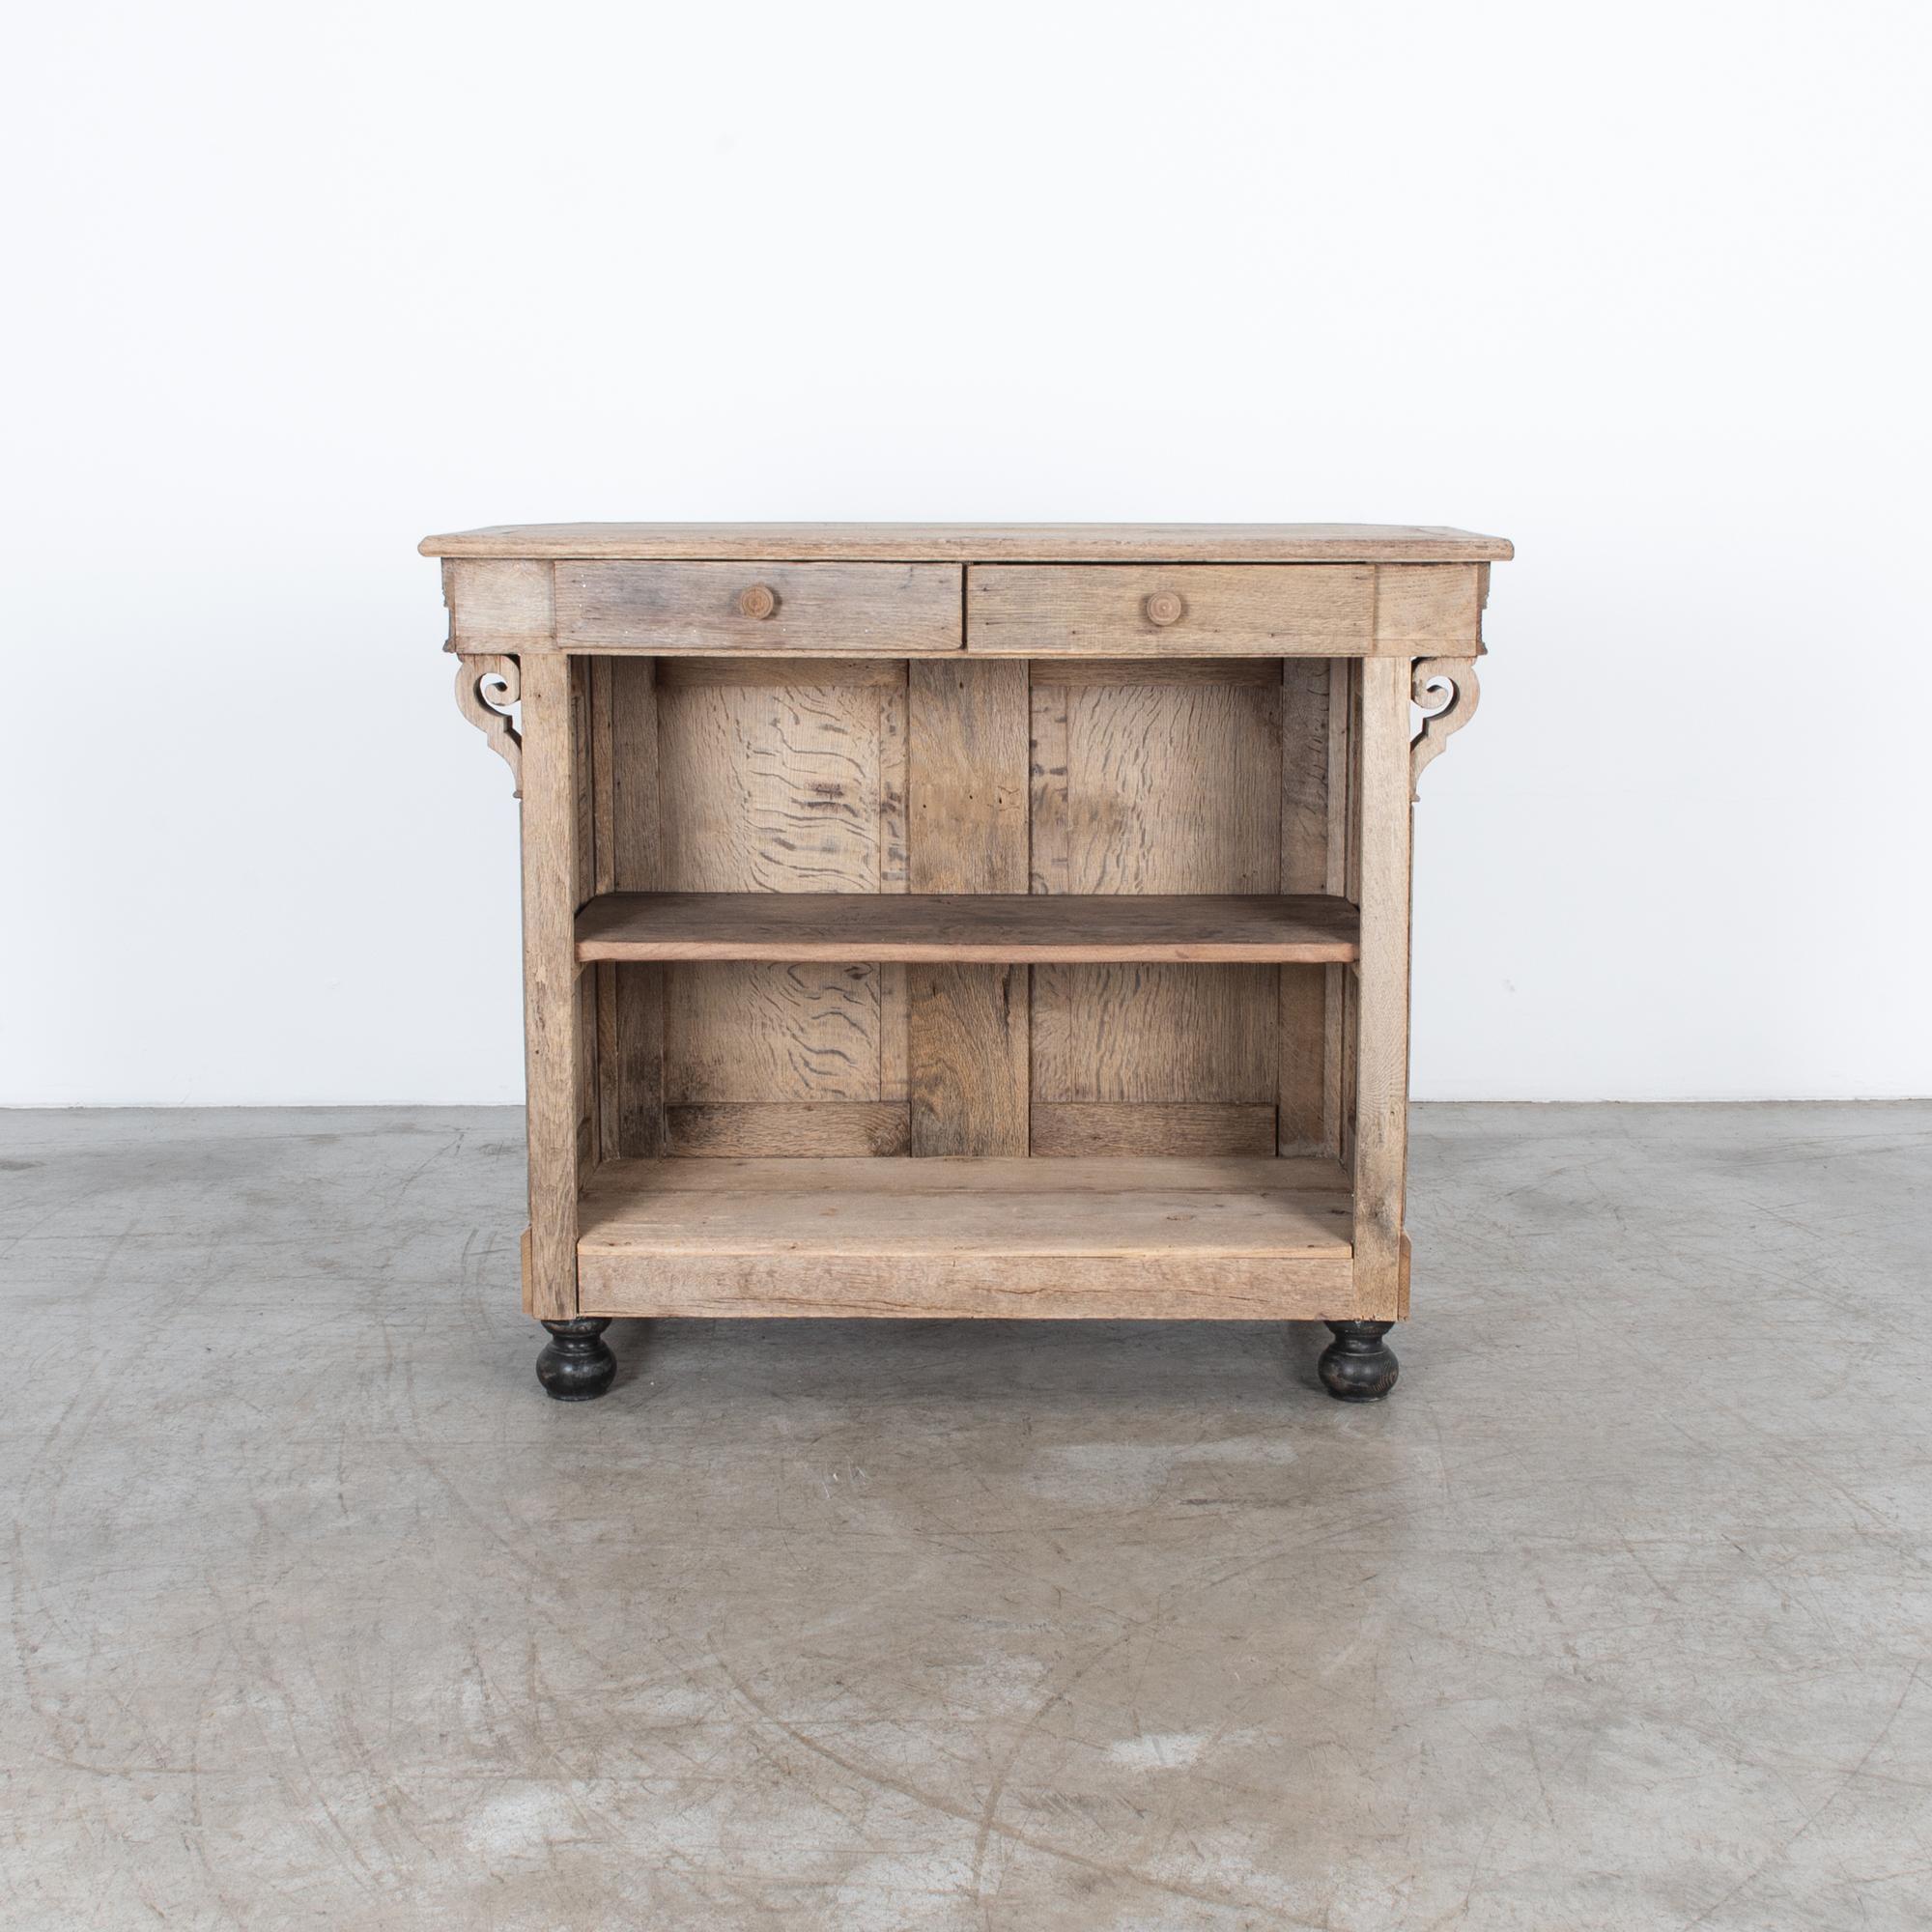 From France, circa 1880. This oak bar counter has been restored in our atelier, removing the fading finish, and polishing with oil and wax to highlight the natural beauty of the wood grain and the textured patina of time. This charming small bar